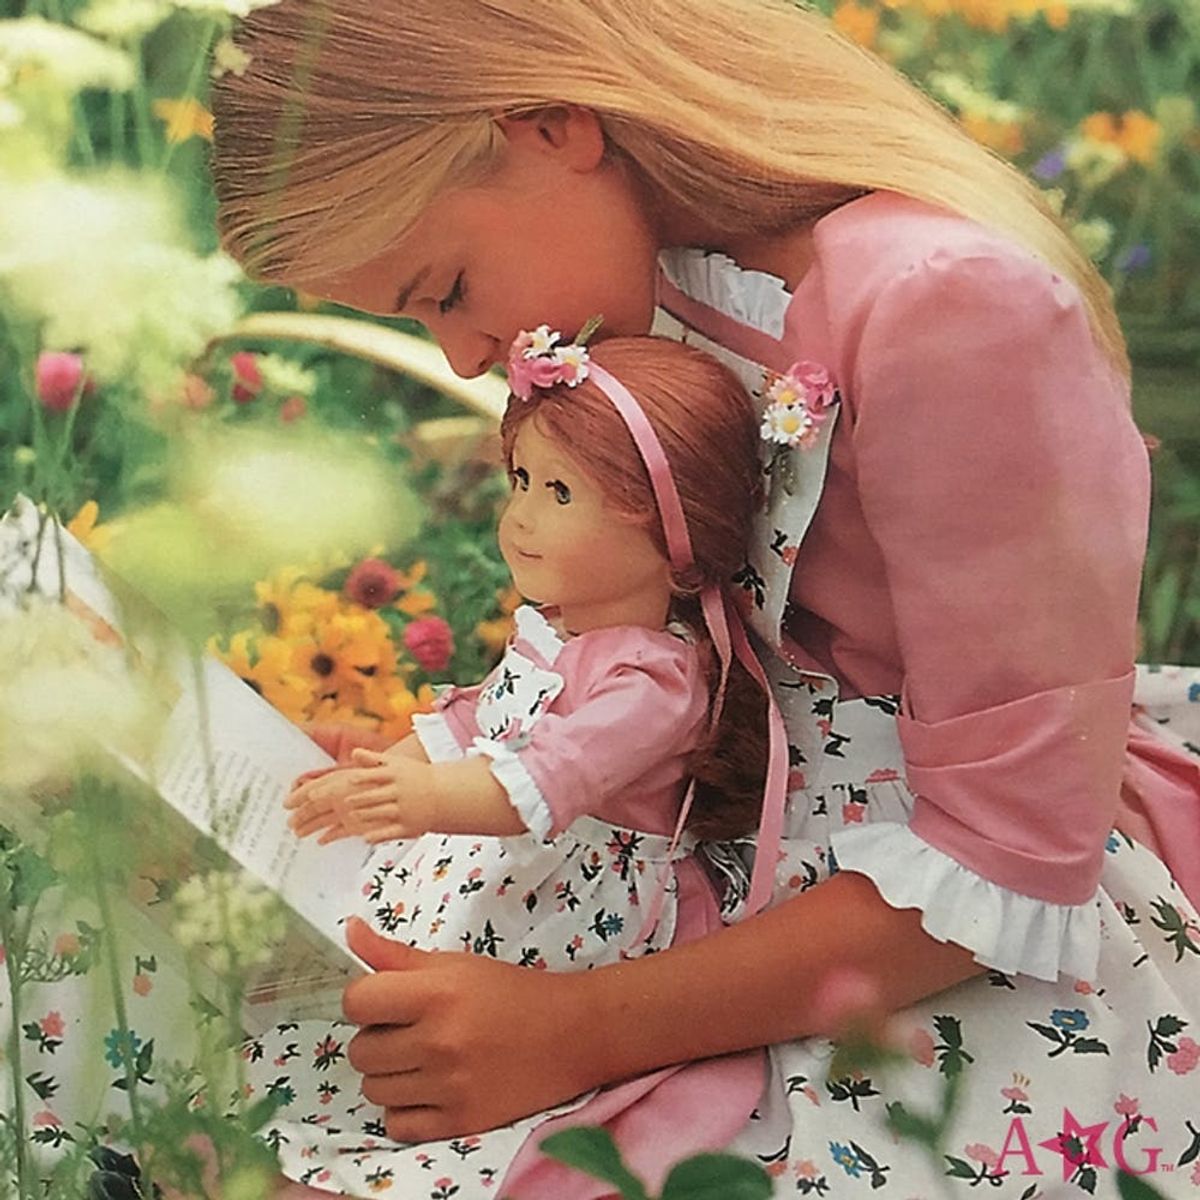 Dream Job Alert: You Can Get Paid to Research Backgrounds of American Girl Dolls